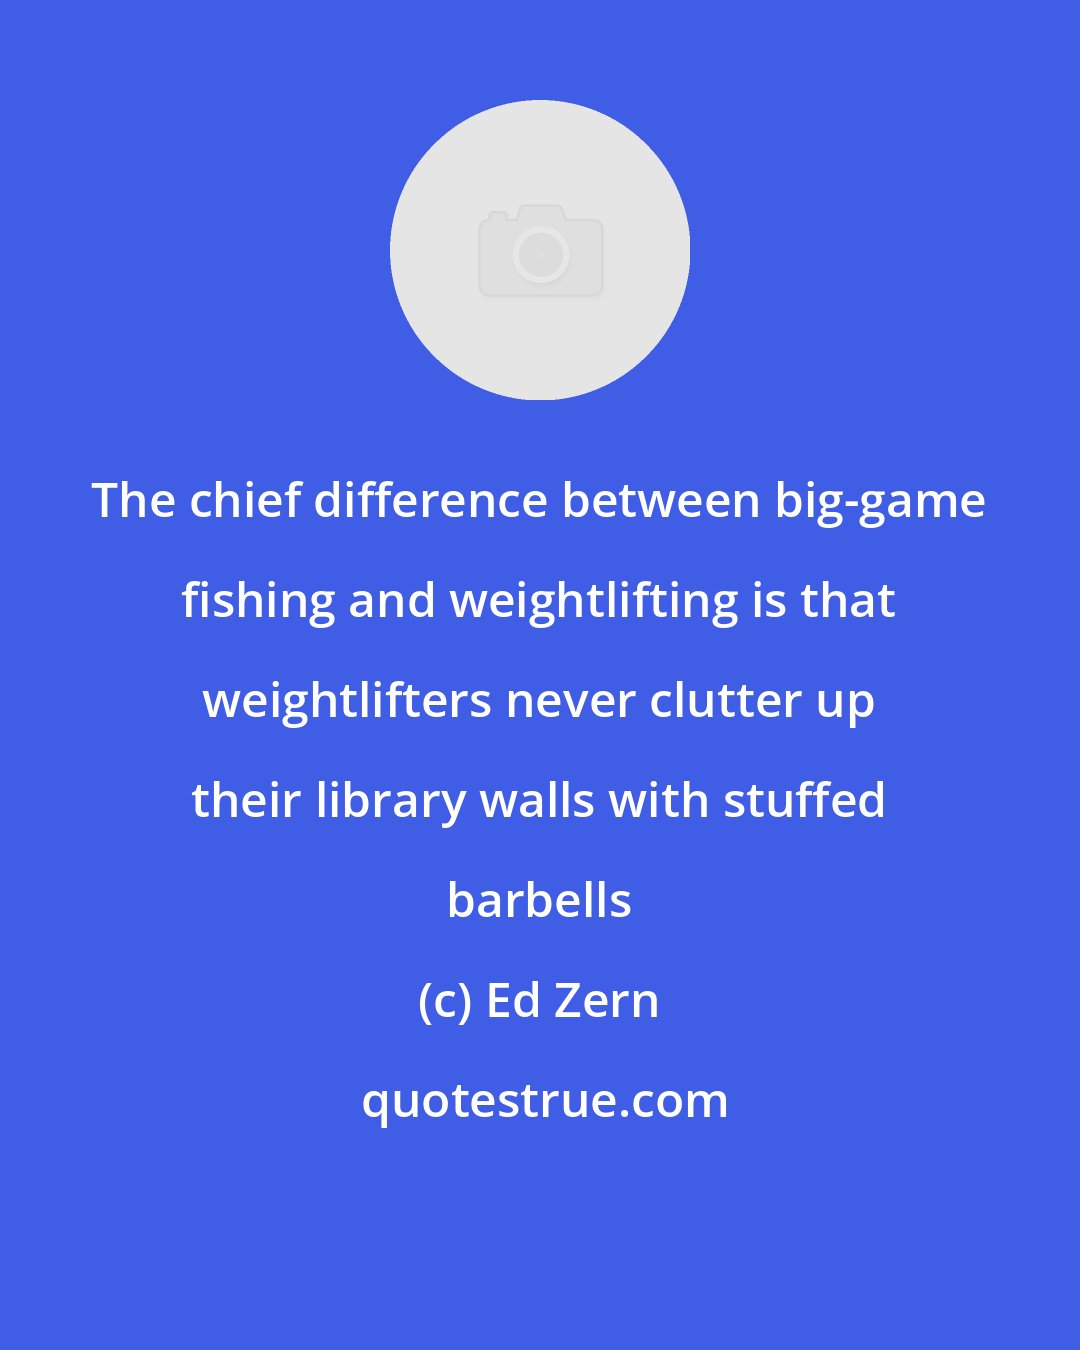 Ed Zern: The chief difference between big-game fishing and weightlifting is that weightlifters never clutter up their library walls with stuffed barbells